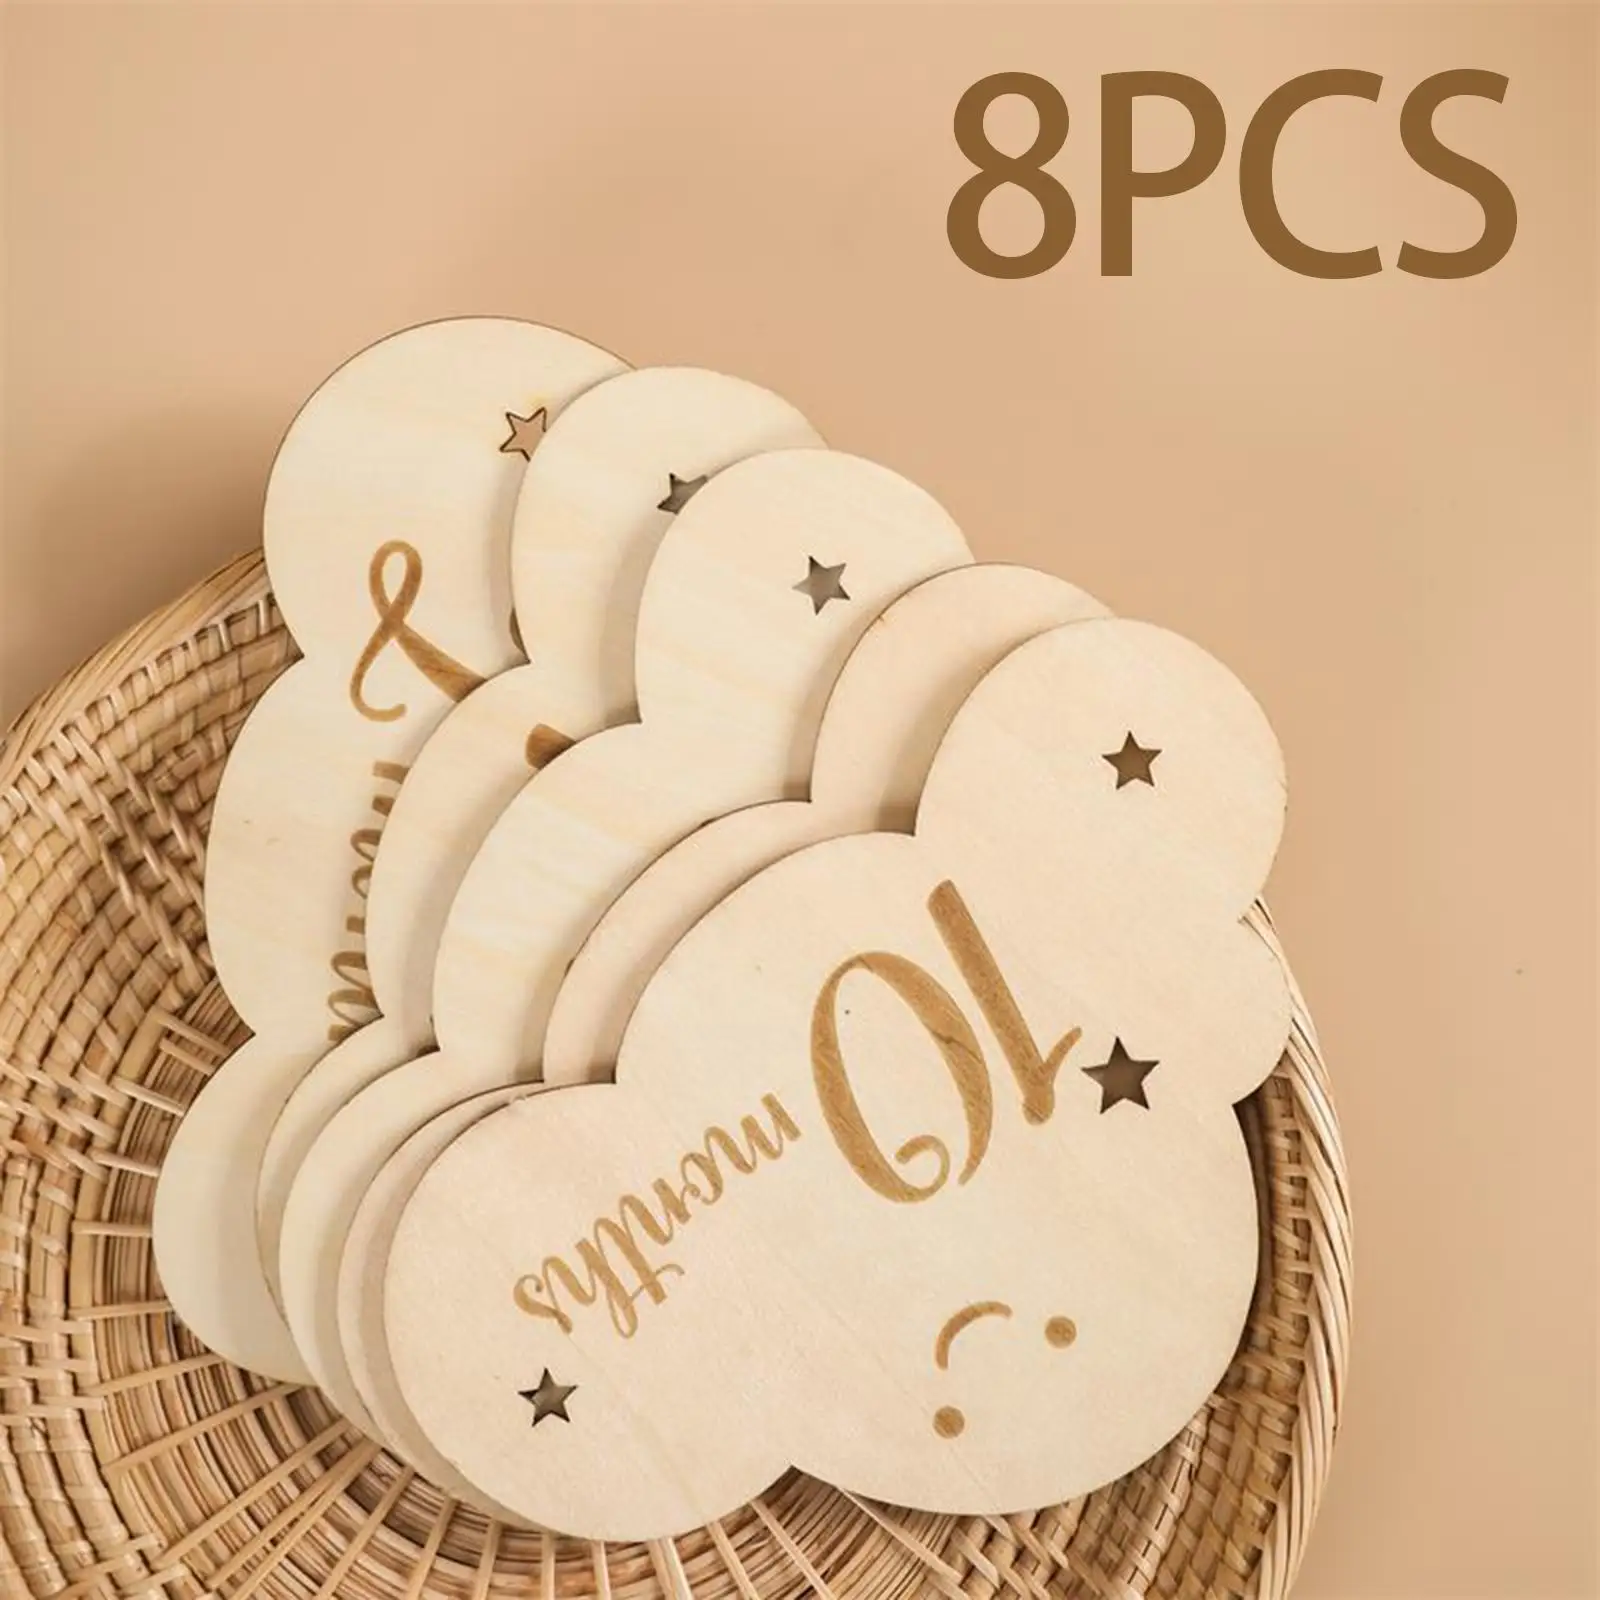 8Pcs Wooden Baby Milestone Cards Smooth Surface Clouds Shape Double Sided Photo Prop Cards Monthly Stickers Newborn Gifts